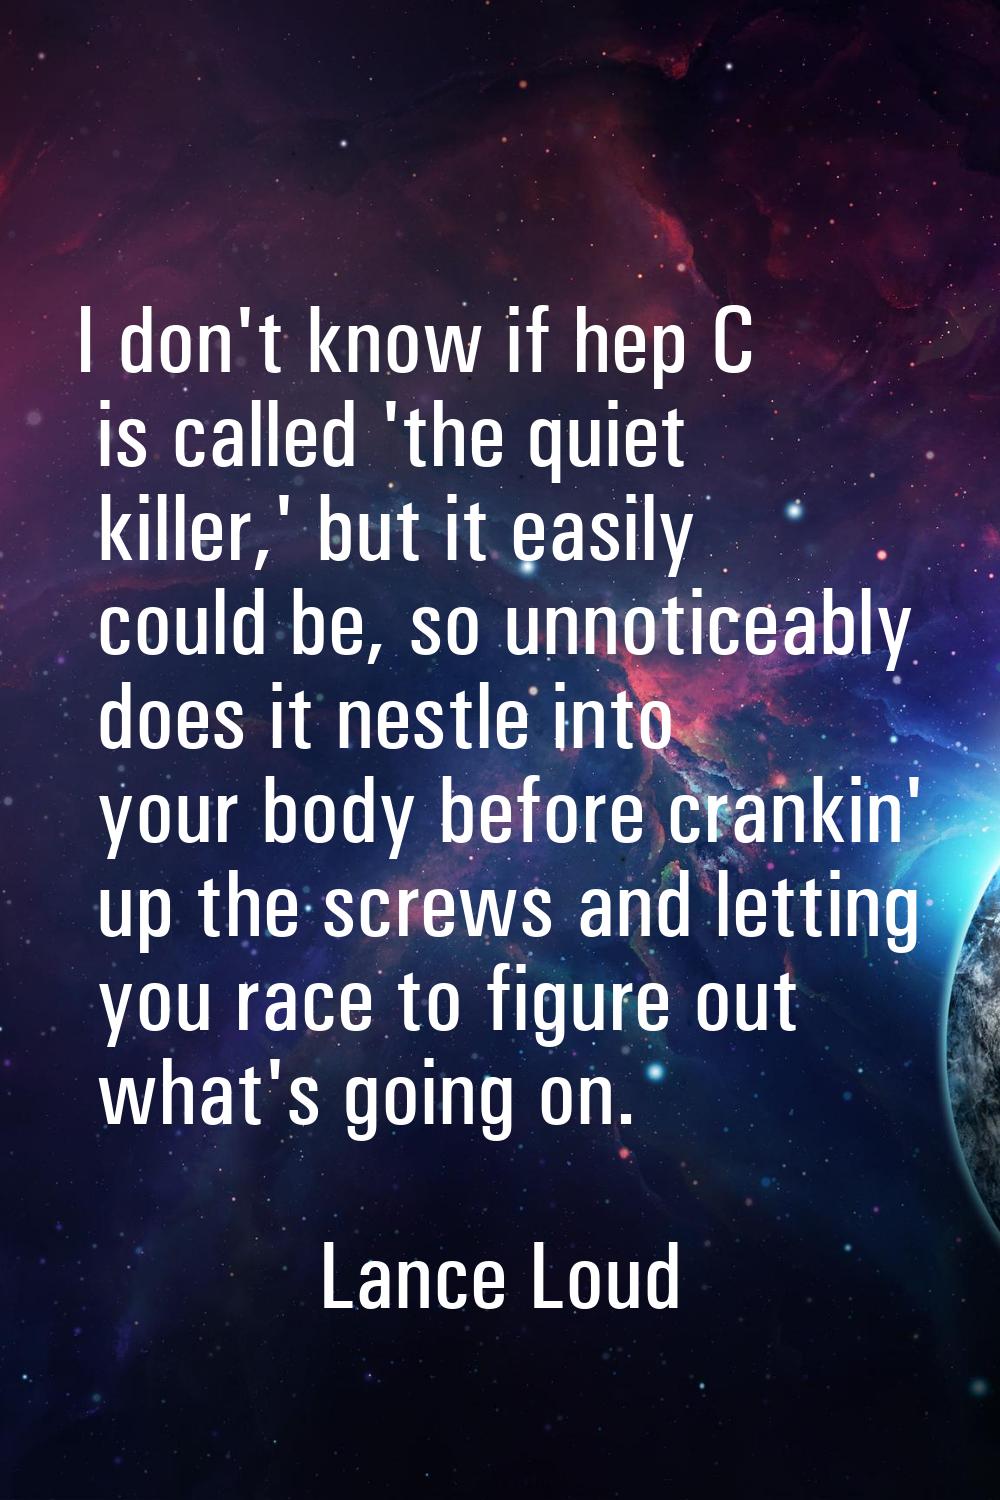 I don't know if hep C is called 'the quiet killer,' but it easily could be, so unnoticeably does it